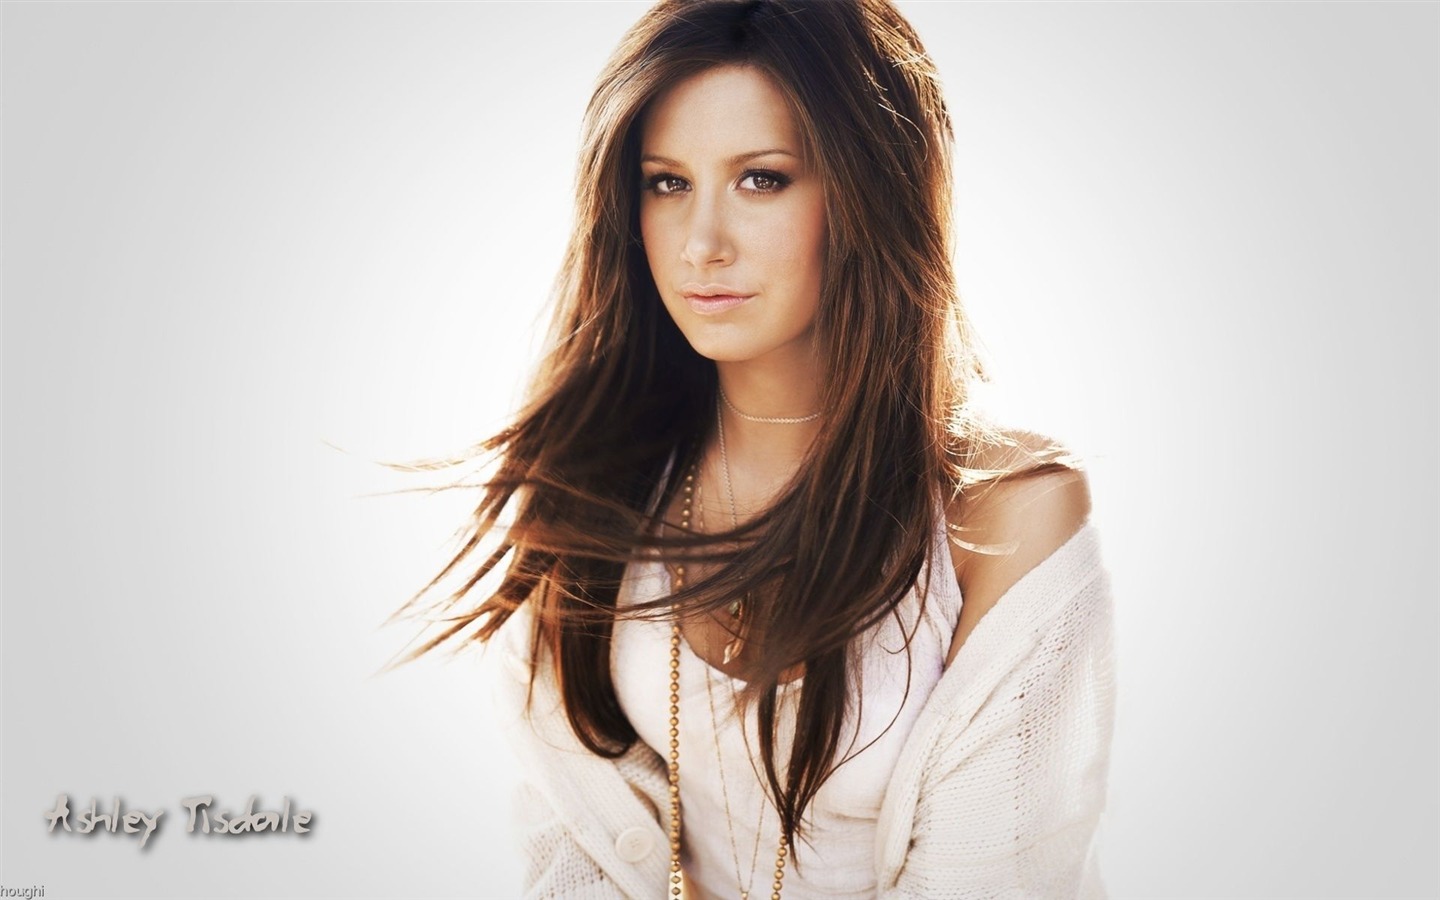 Ashley Tisdale #077 - 1440x900 Wallpapers Pictures Photos Images